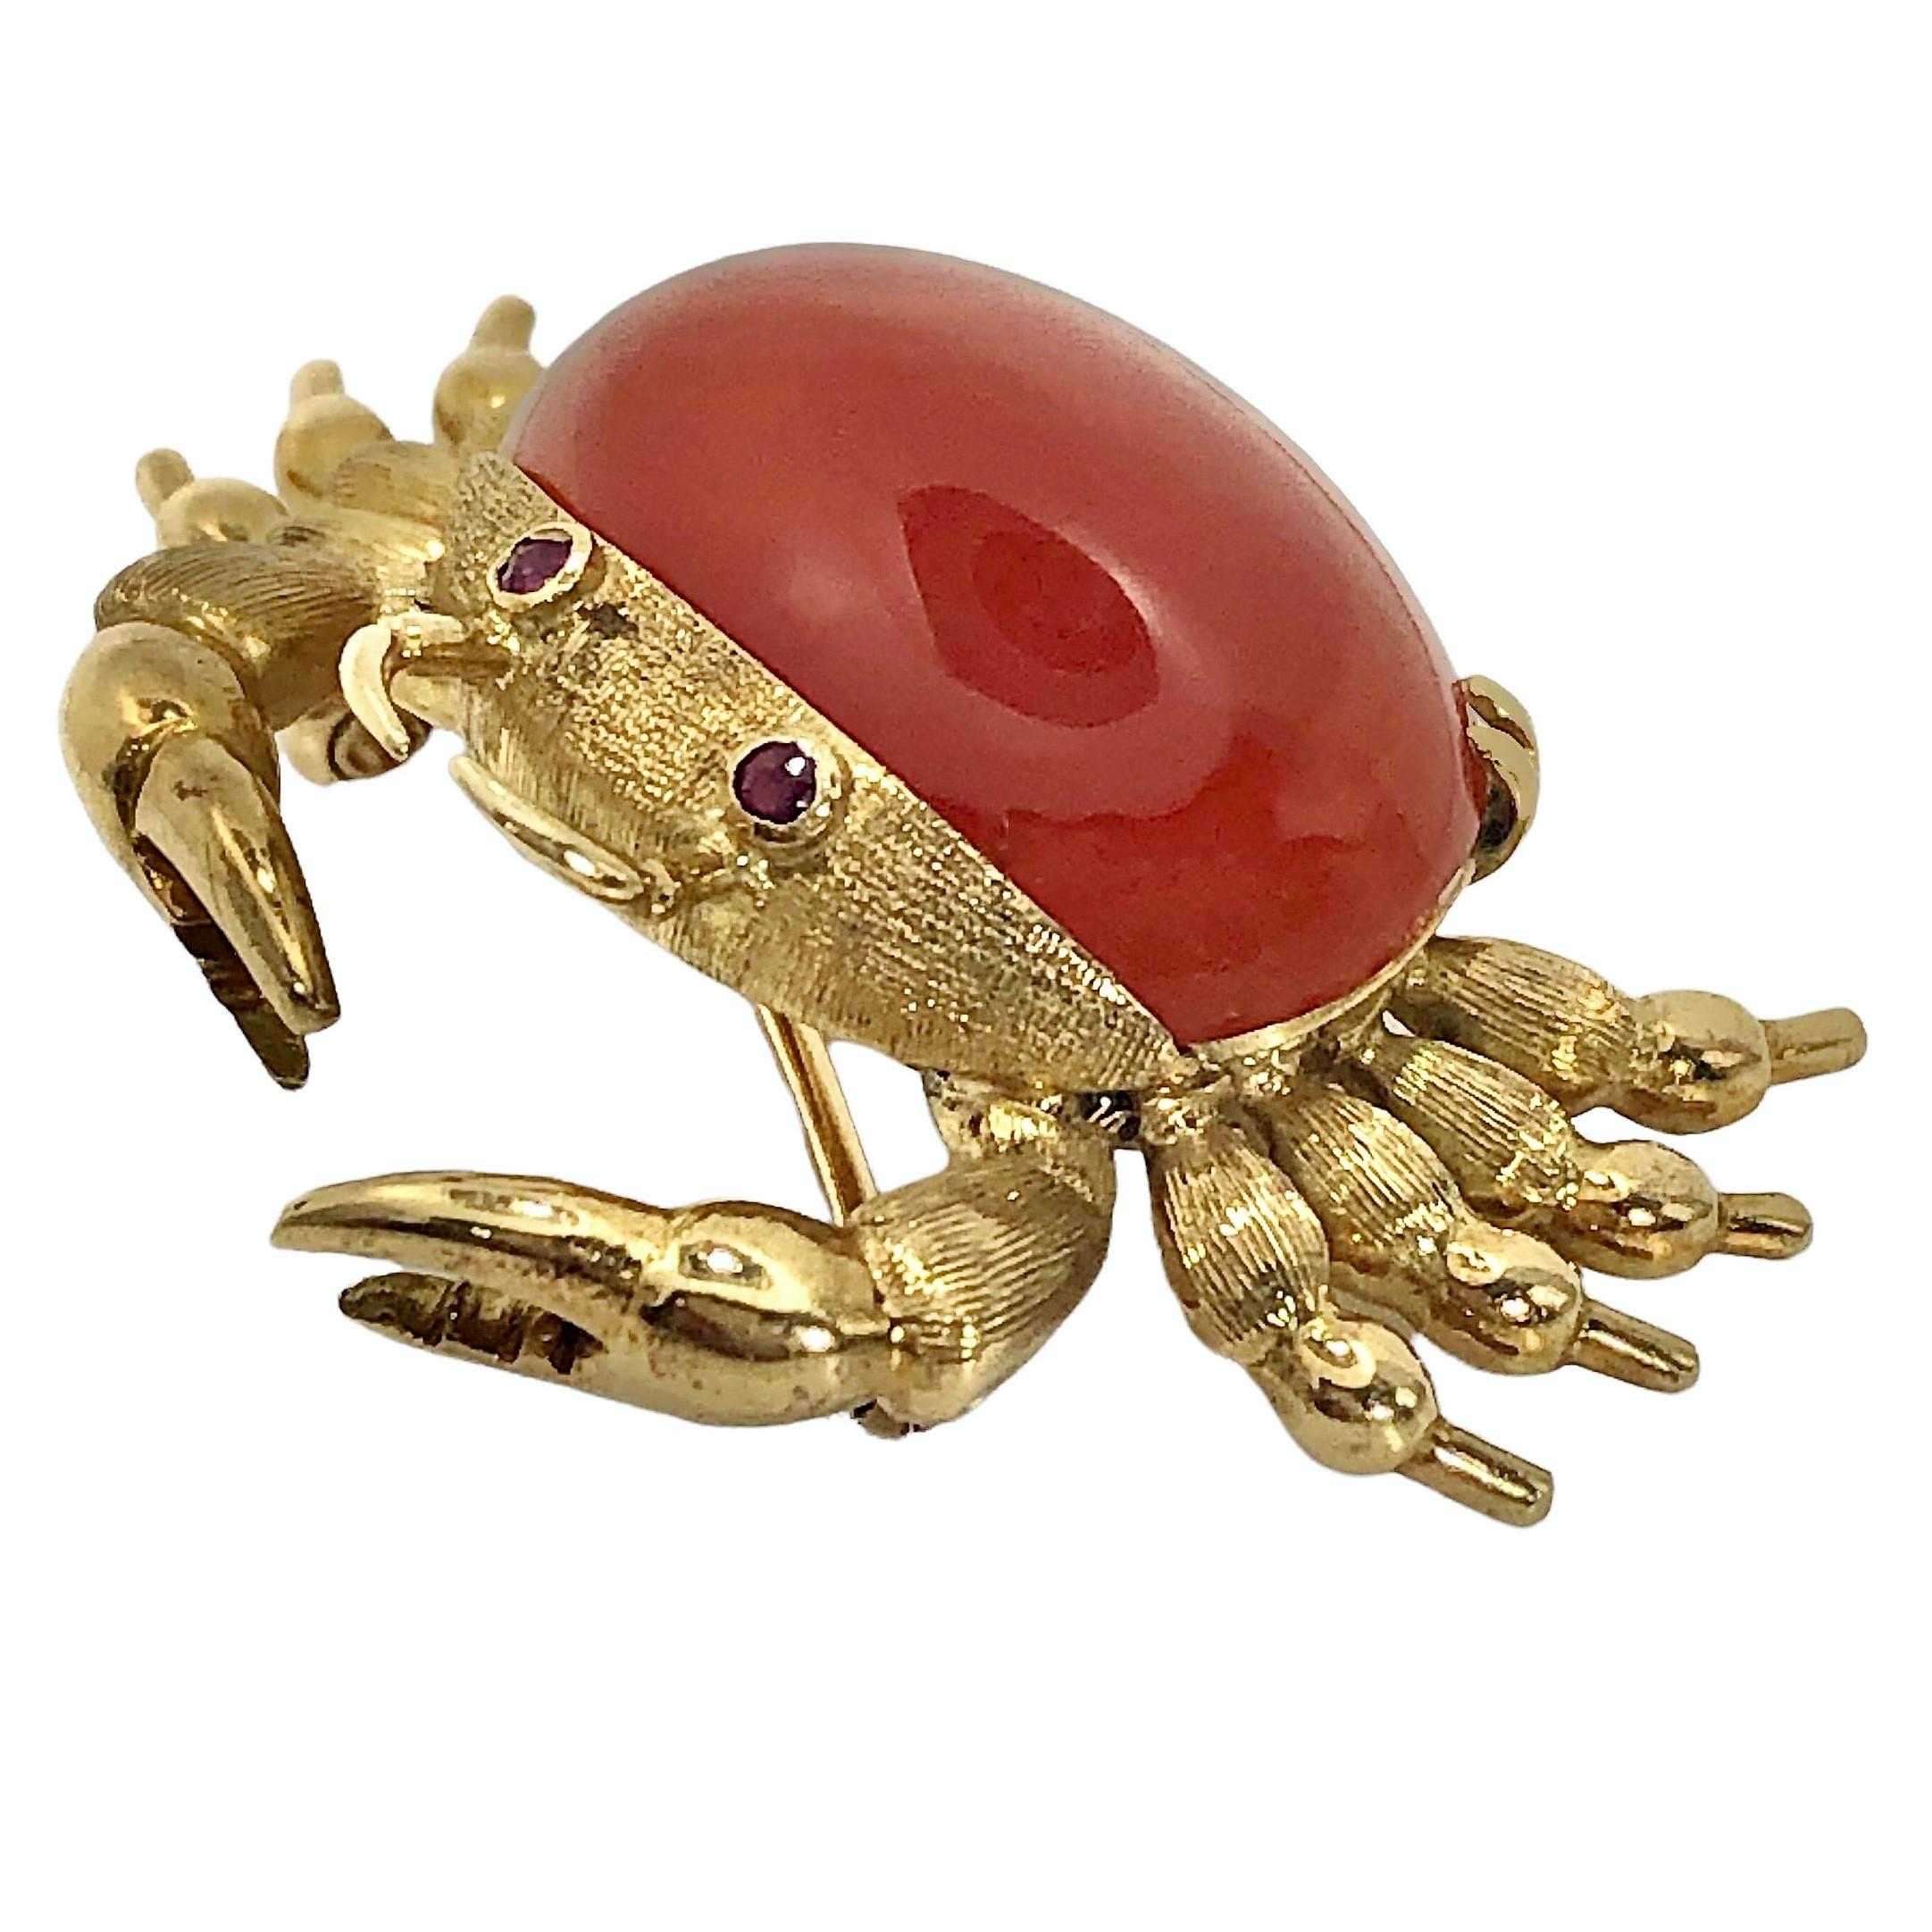 This realistically crafted Italian brooch is quite convincing in appearance because of the great attention paid to detail.  The 18K yellow gold body is 
set with a carnelian carapace and with bezel set ruby eyes. The brooch measures 15/16 inches in